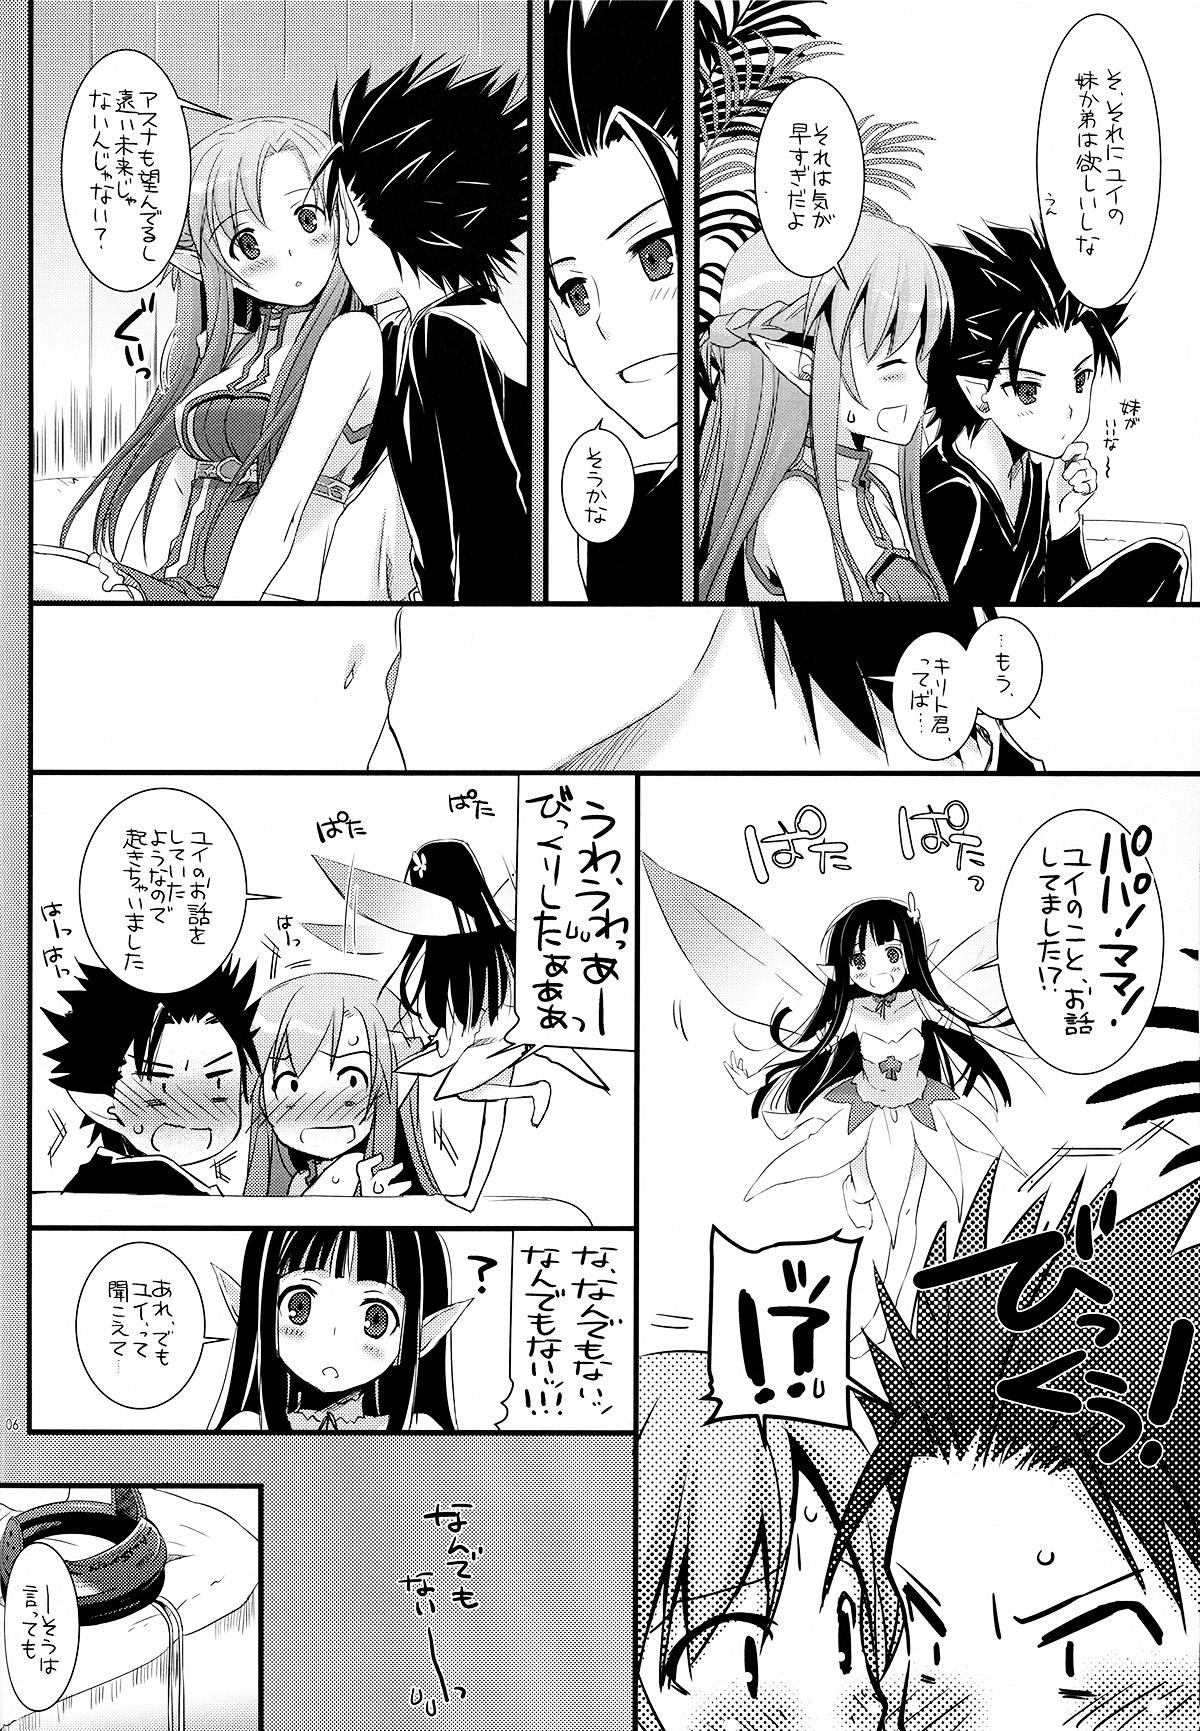 Women D.L.action 70 - Sword art online Fucking Pussy - Page 7